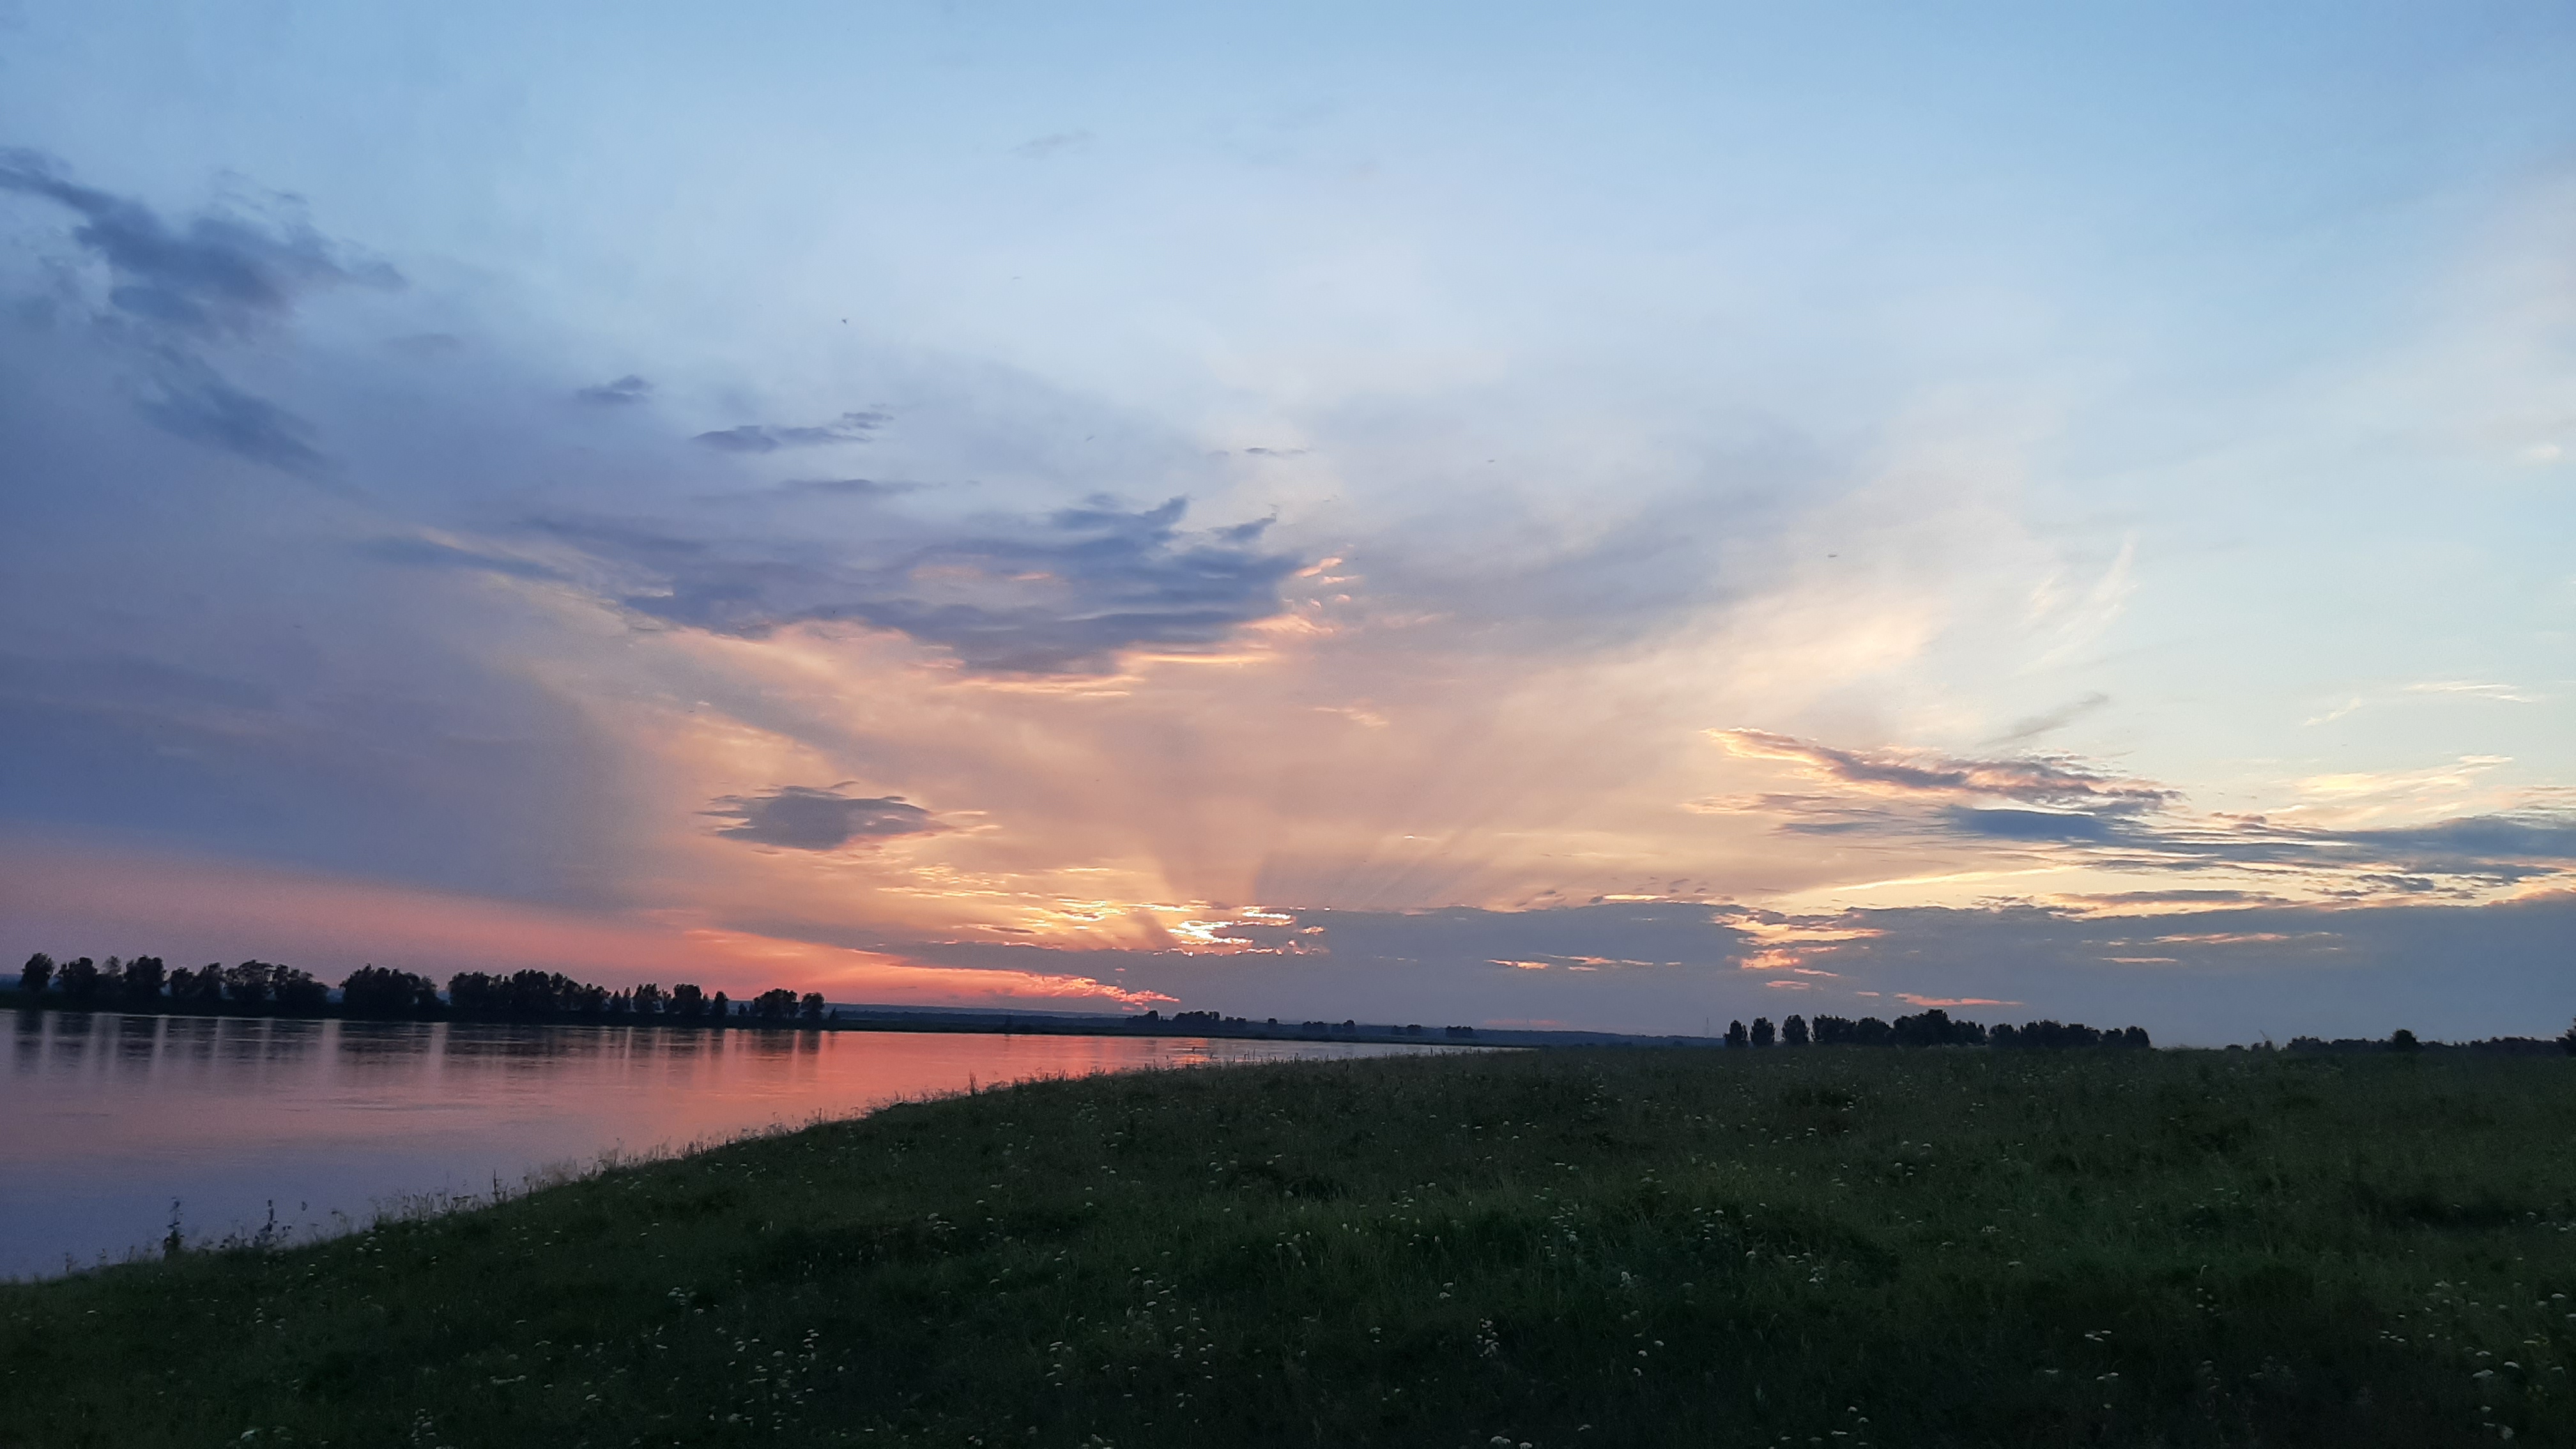 Sunset on the Lena River in late summer